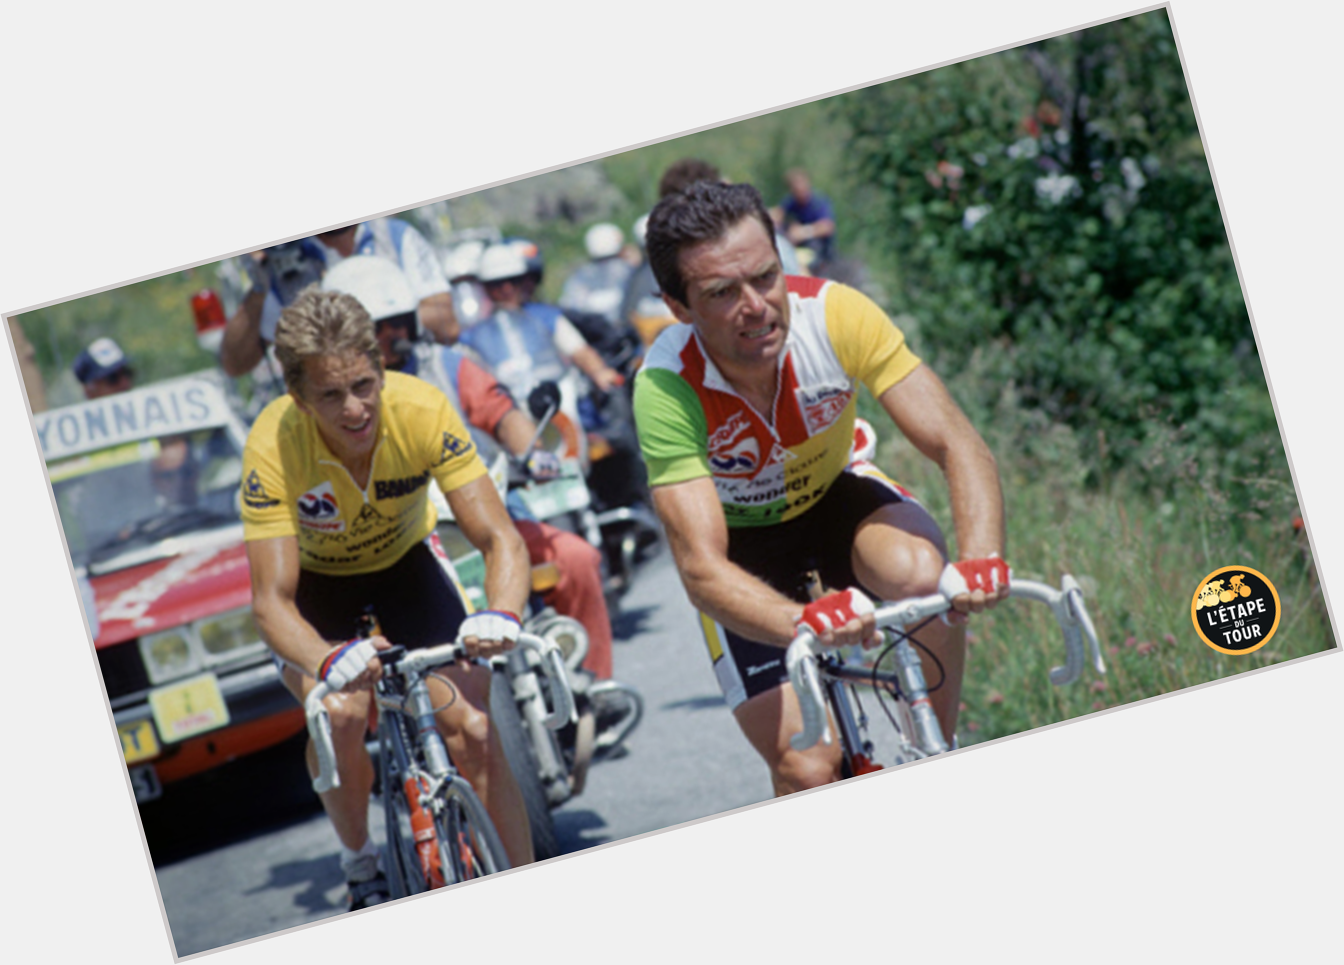 Happy birthday to who is turning 60 today!
Pic: Col de la Croix de Fer - 1986 